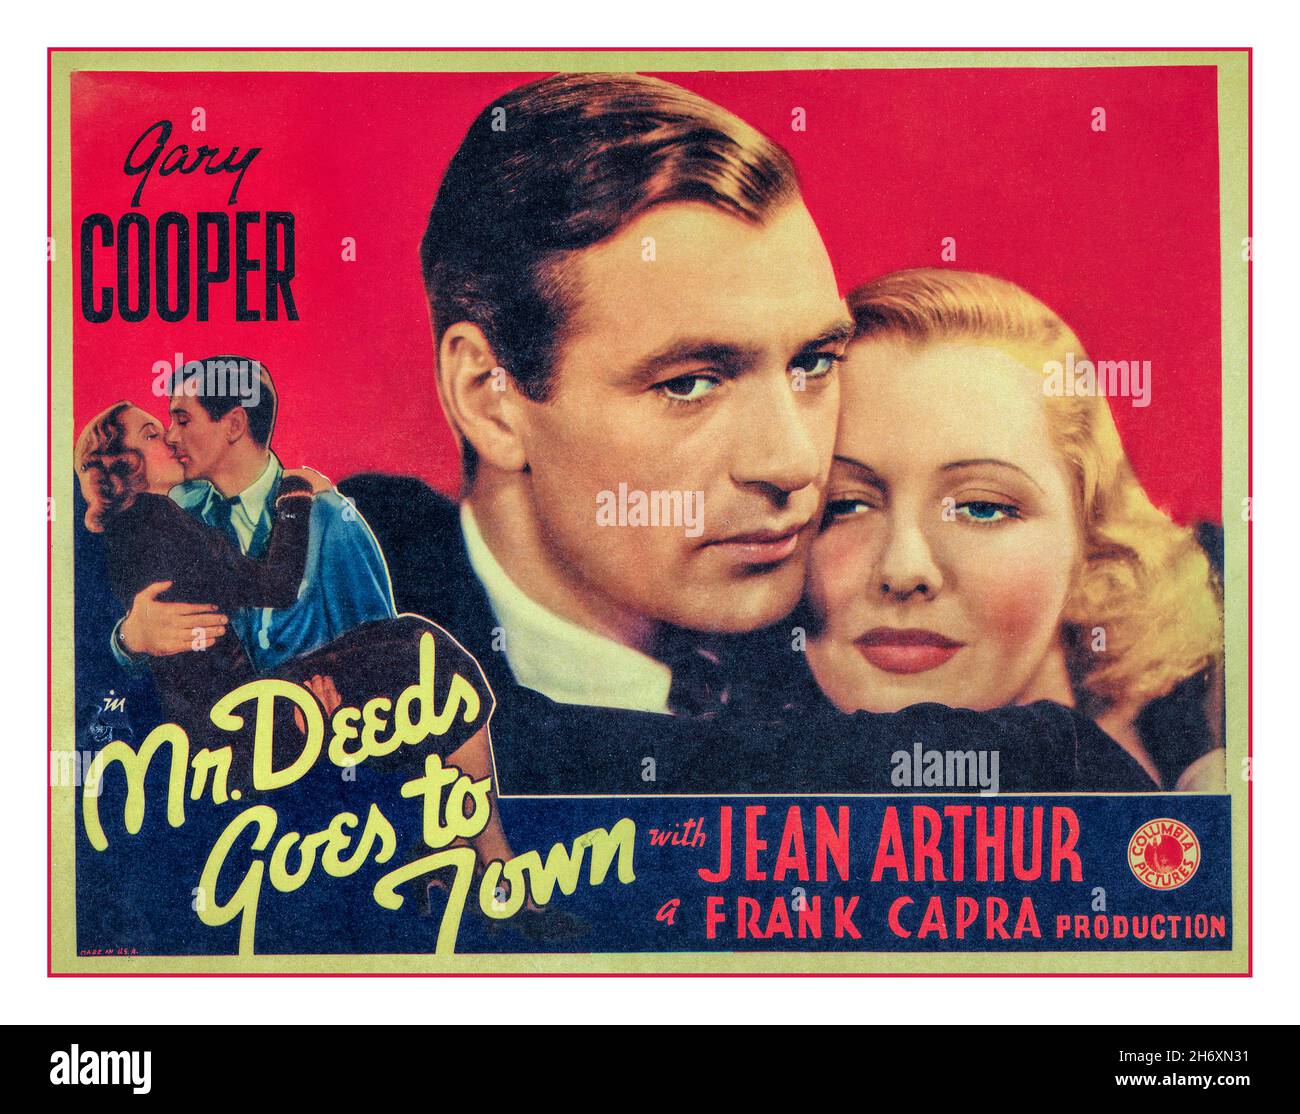 GARY COOPER Vintage 1930s Movie Film Poster Mr. Deeds Goes to Town a 1936 American comedy-drama romance film directed by Frank Capra and starring Gary Cooper and Jean Arthur in her first featured role. Screenplay was written by Robert Riskin in his fifth collaboration with Frank Capra.  starring Gary Cooper as Longfellow Deeds Jean Arthur as Louise 'Babe' Bennett/Mary Dawson George Bancroft as MacWade Lionel Stander as Cornelius Cobb Douglass Dumbrille as John Cedar Raymond Walburn as Walter, the Butler H. B. Warner as Judge May Stock Photo